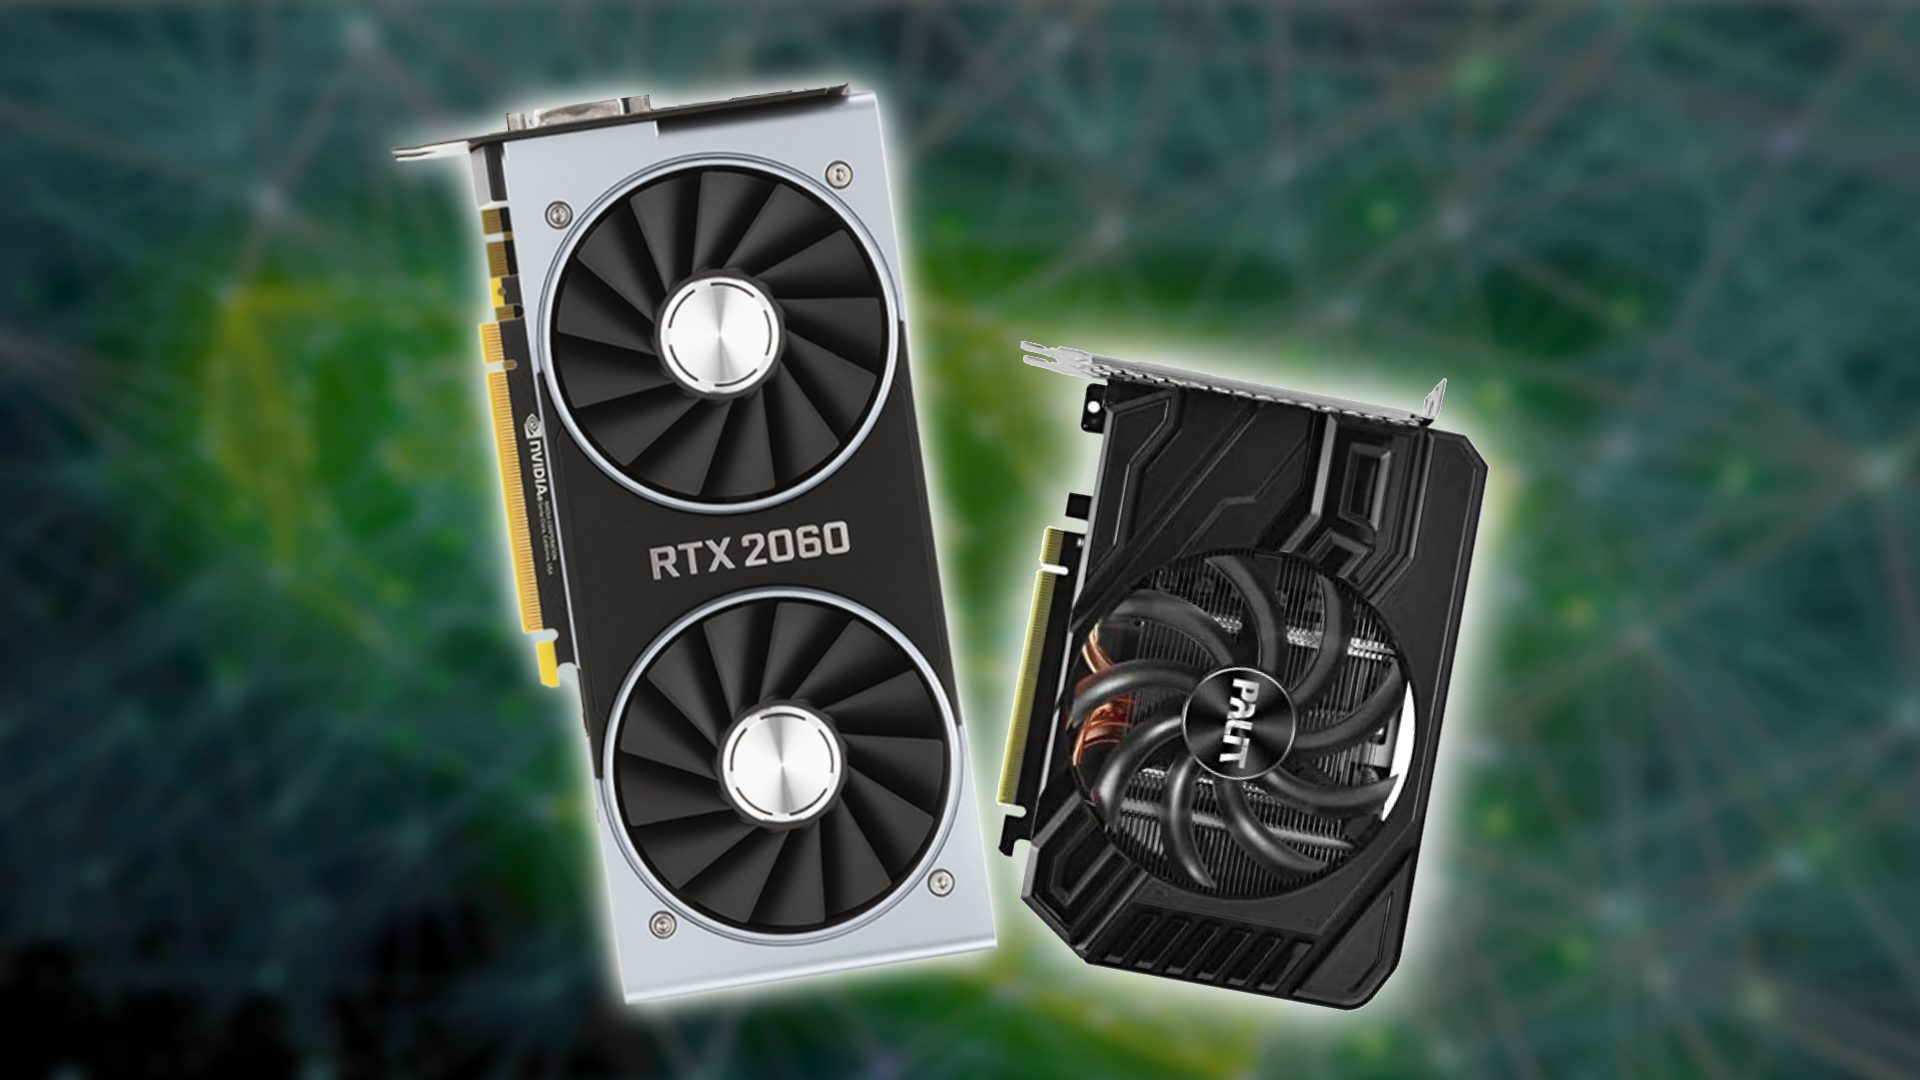 The Nvidia RTX 2060 and GTX 1660 are seemingly retiring